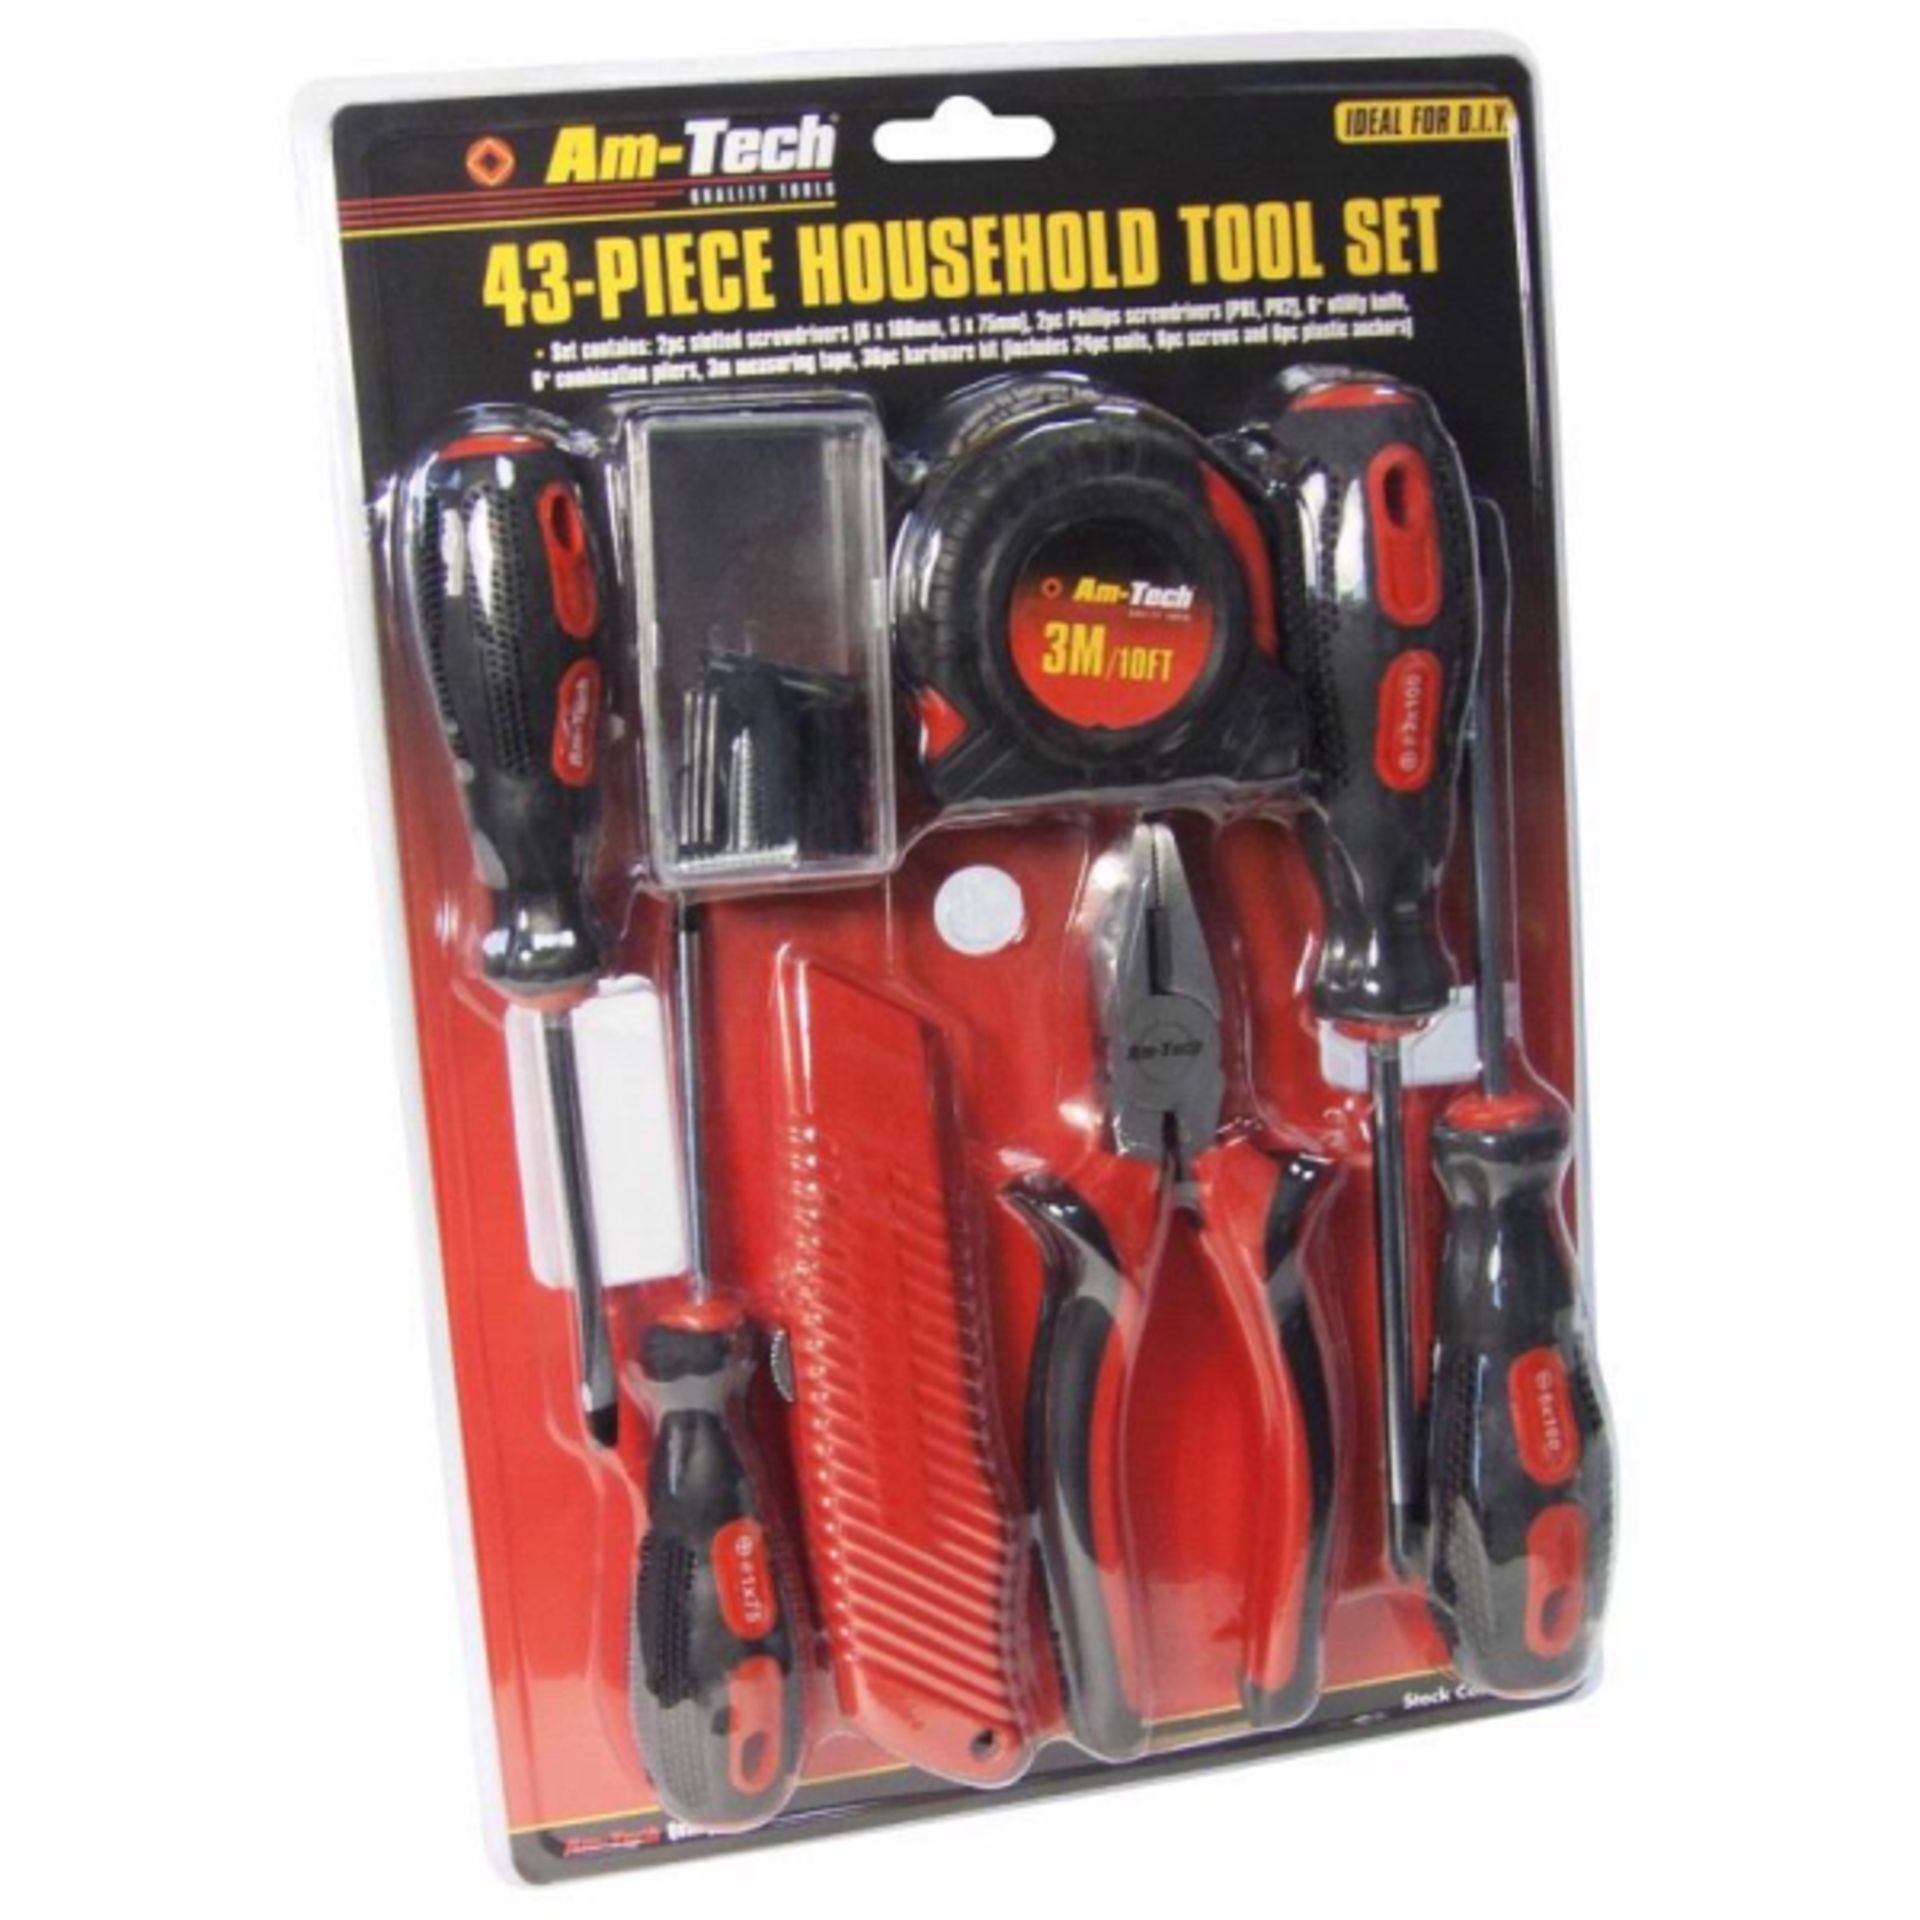 V *TRADE QTY* Brand New Forty Three Piece Household Tool Set Inc Pliers, Screwdrivers Etc X 4 YOUR